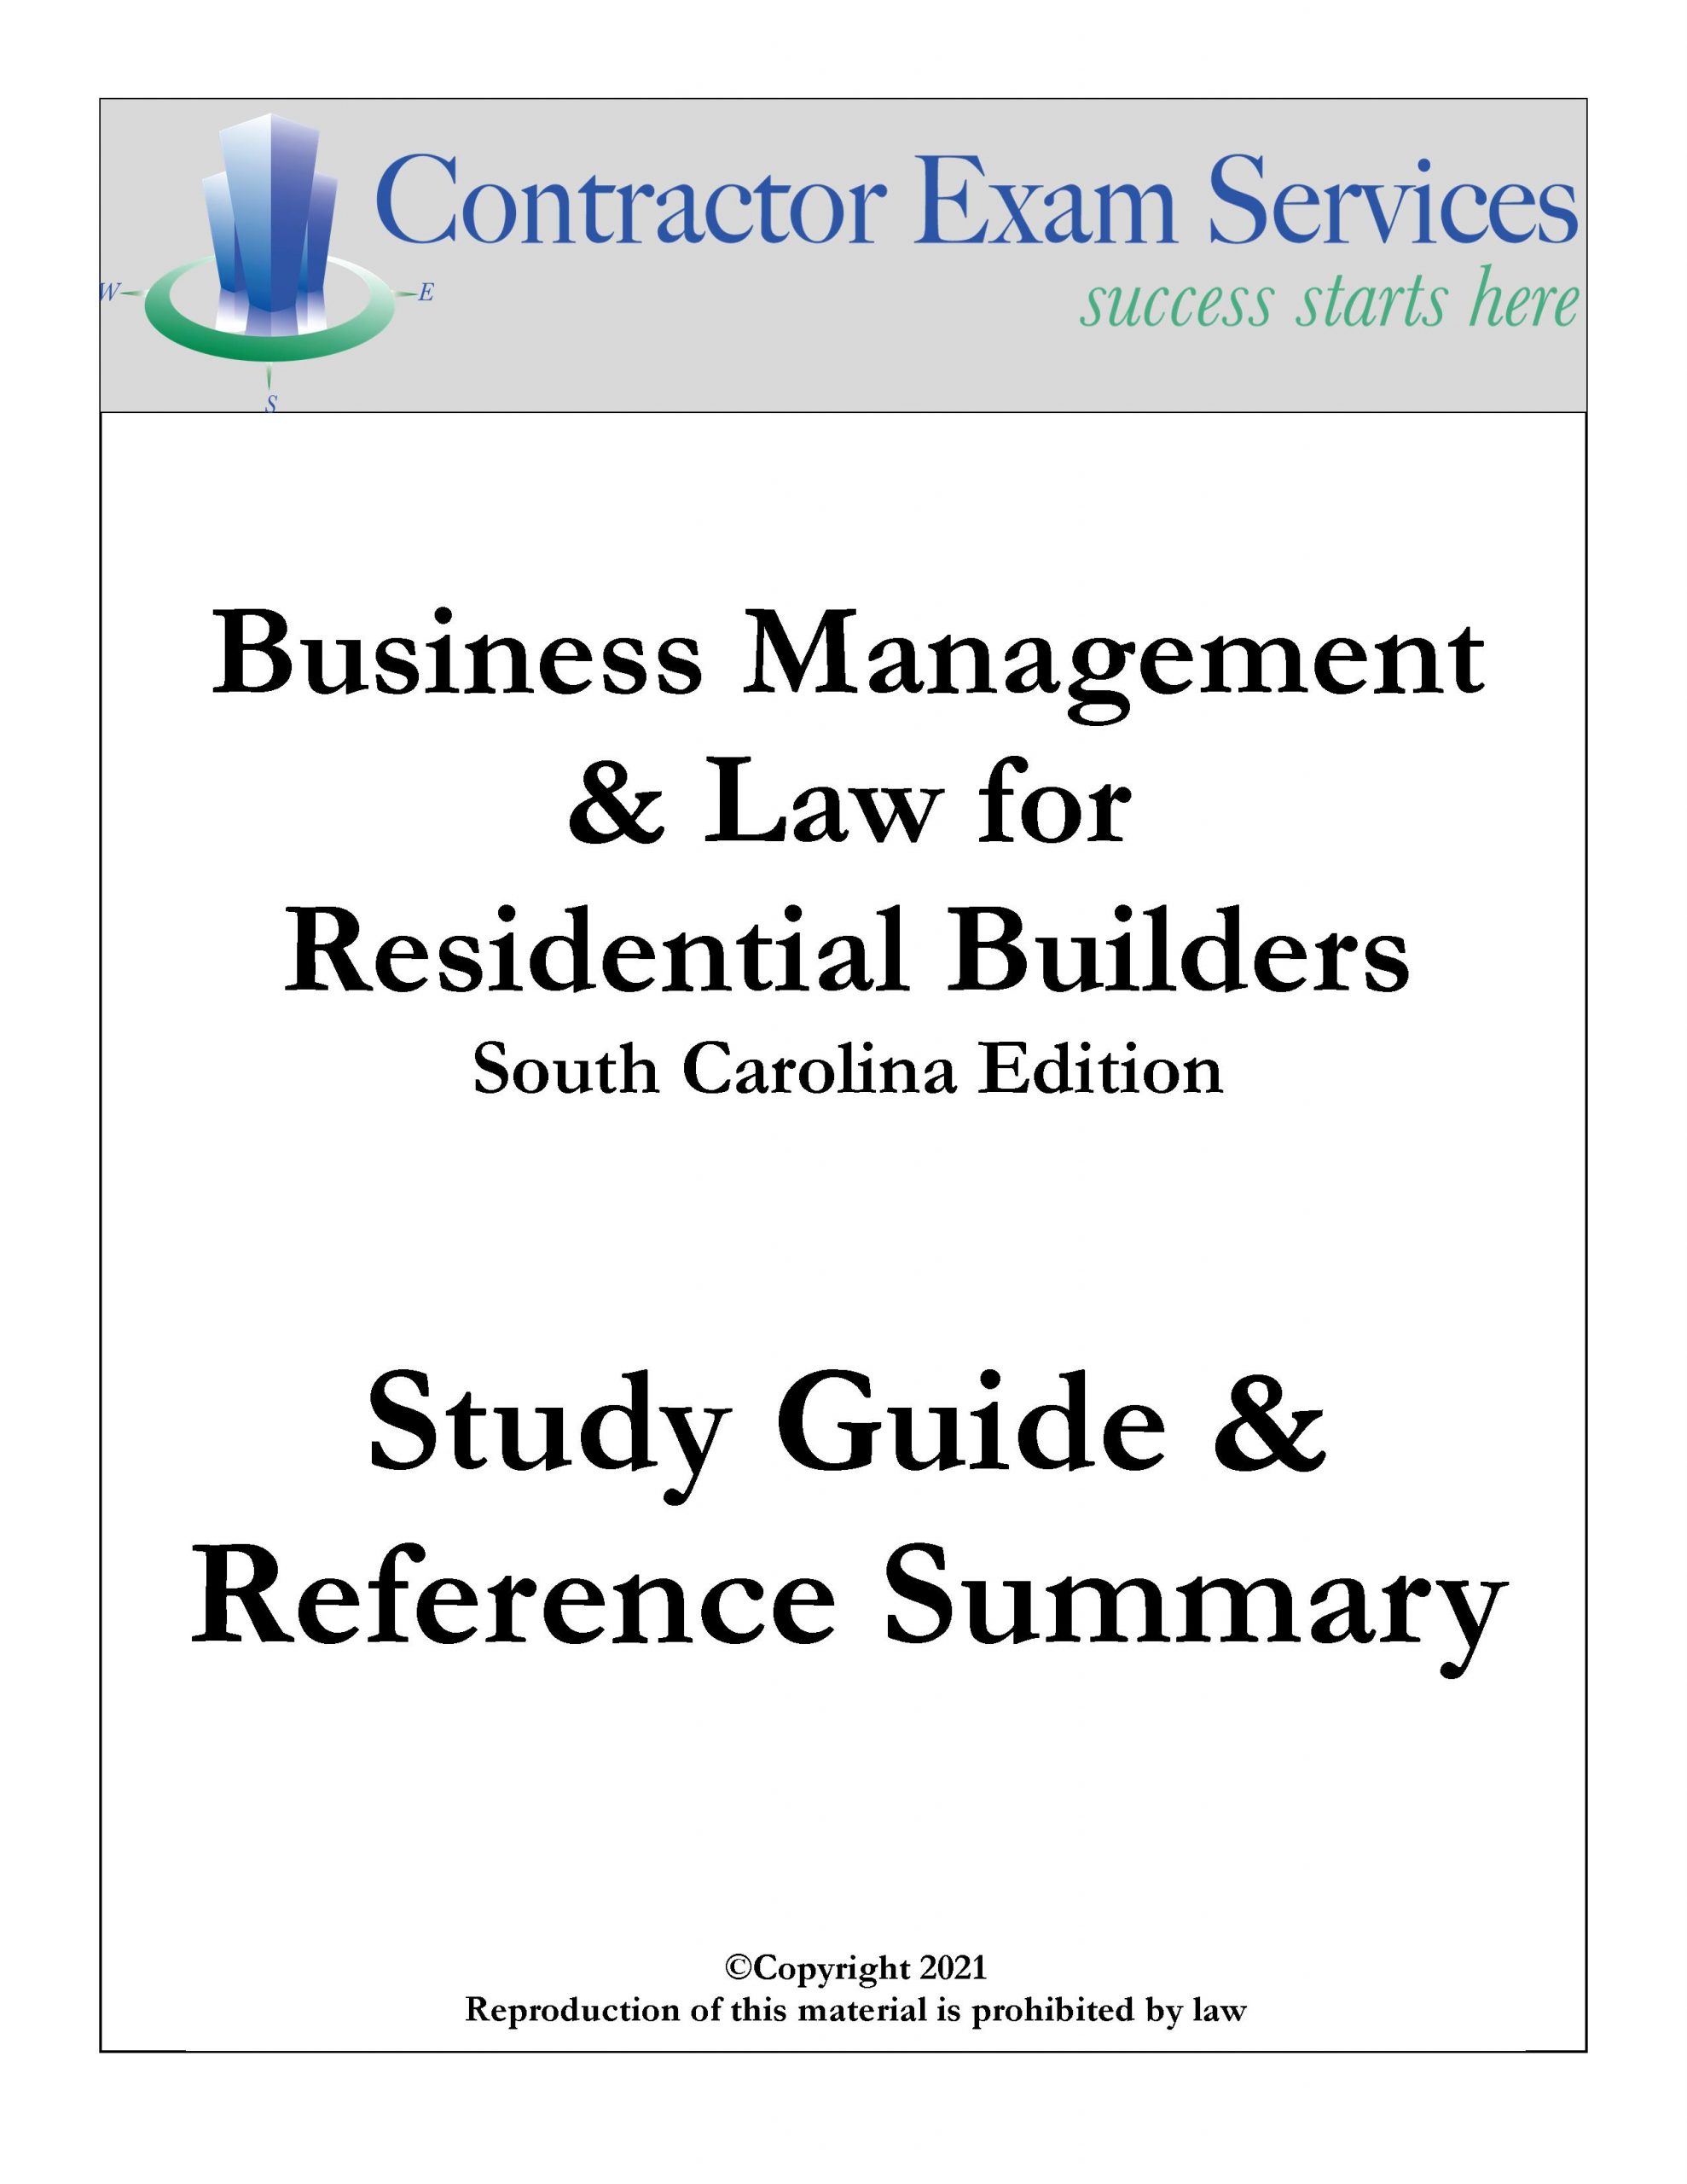 SC Business Management & Law for Residential Contractors Study Guide